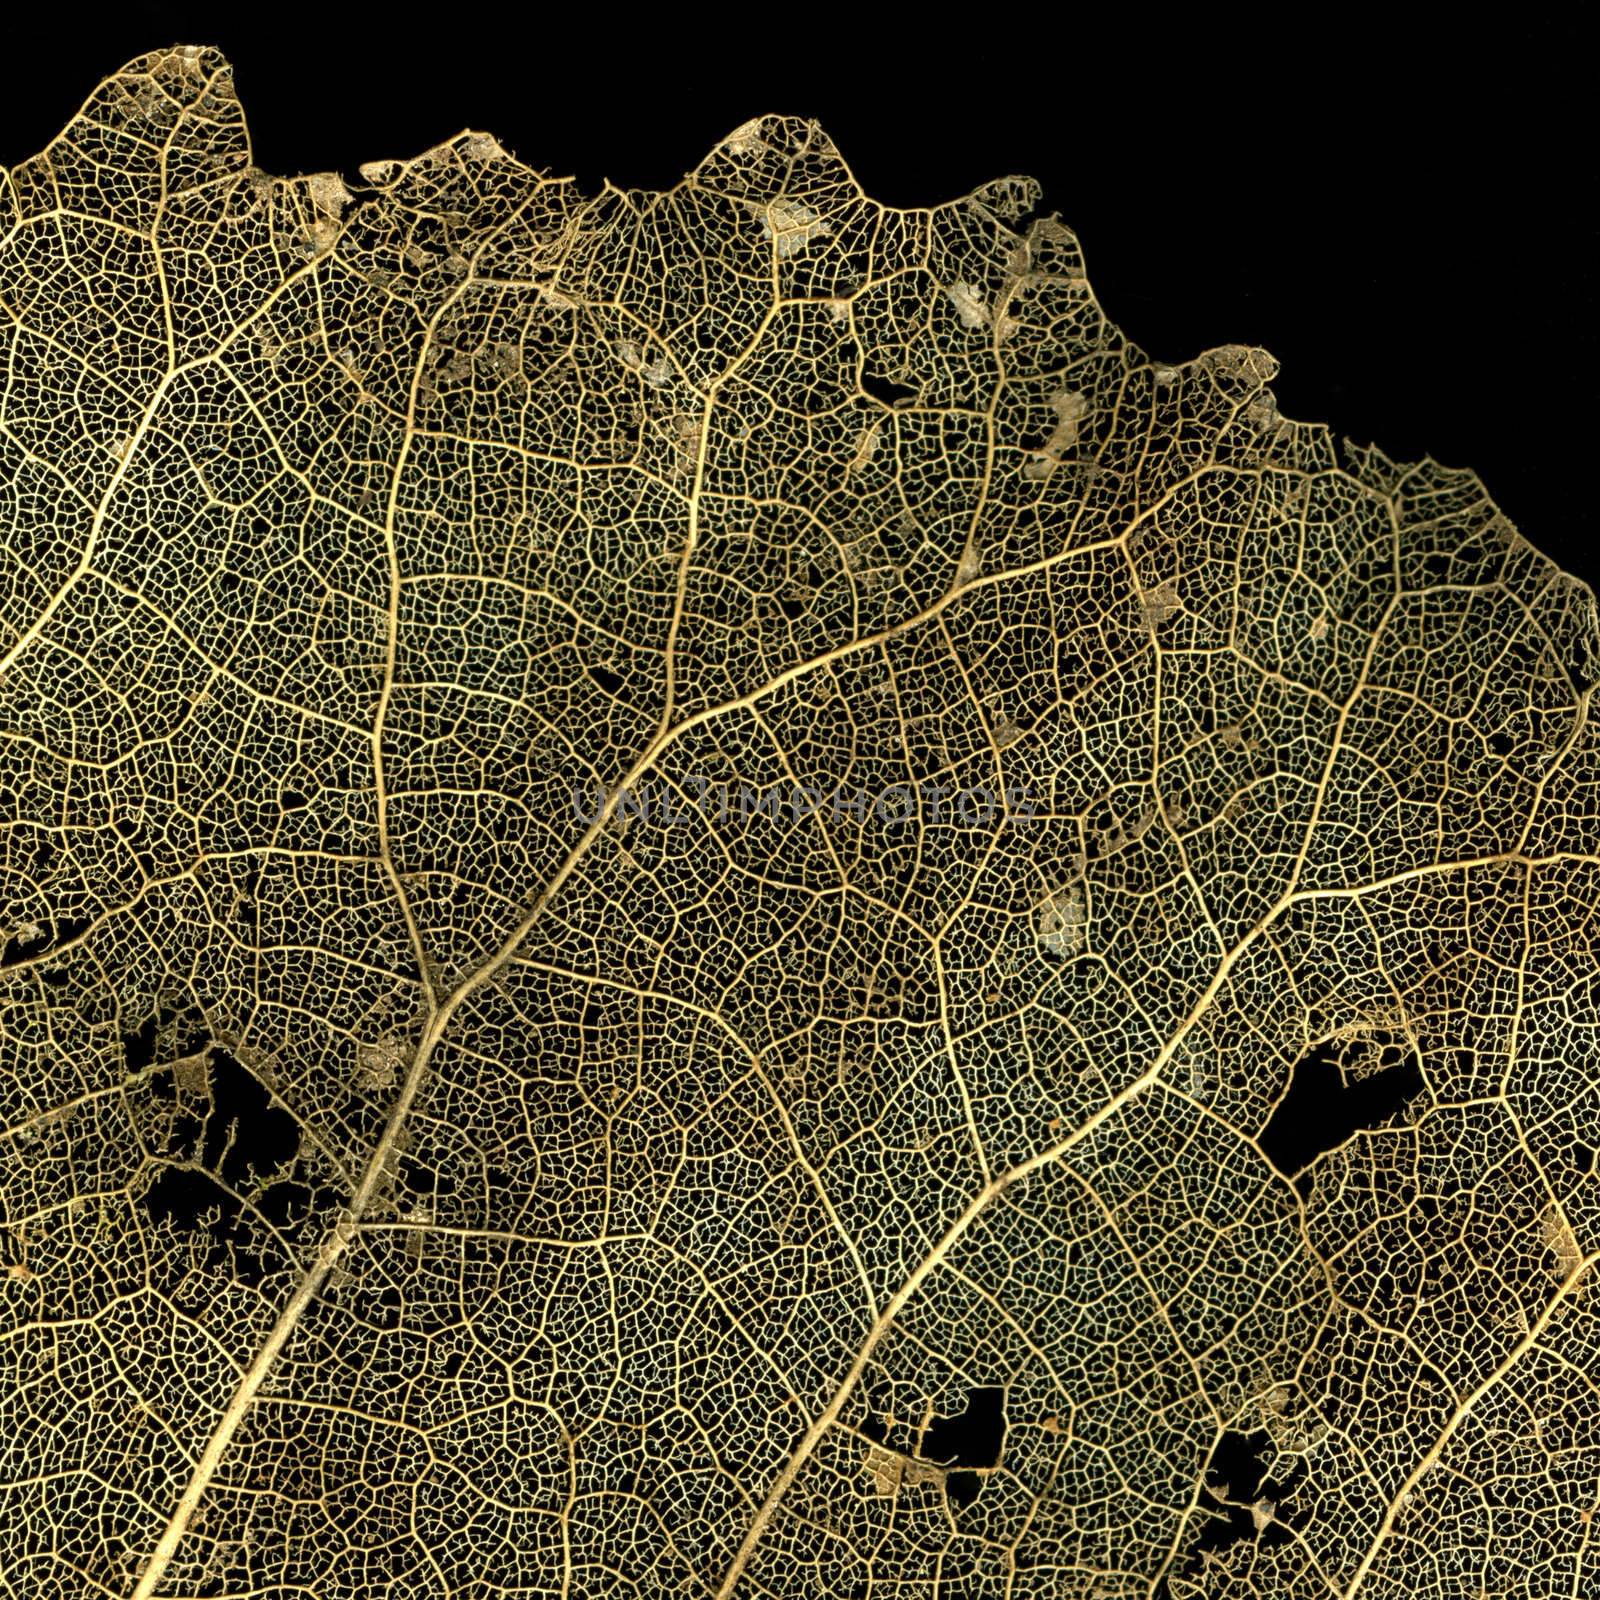 dried popplar tree leaf with vein structure on black